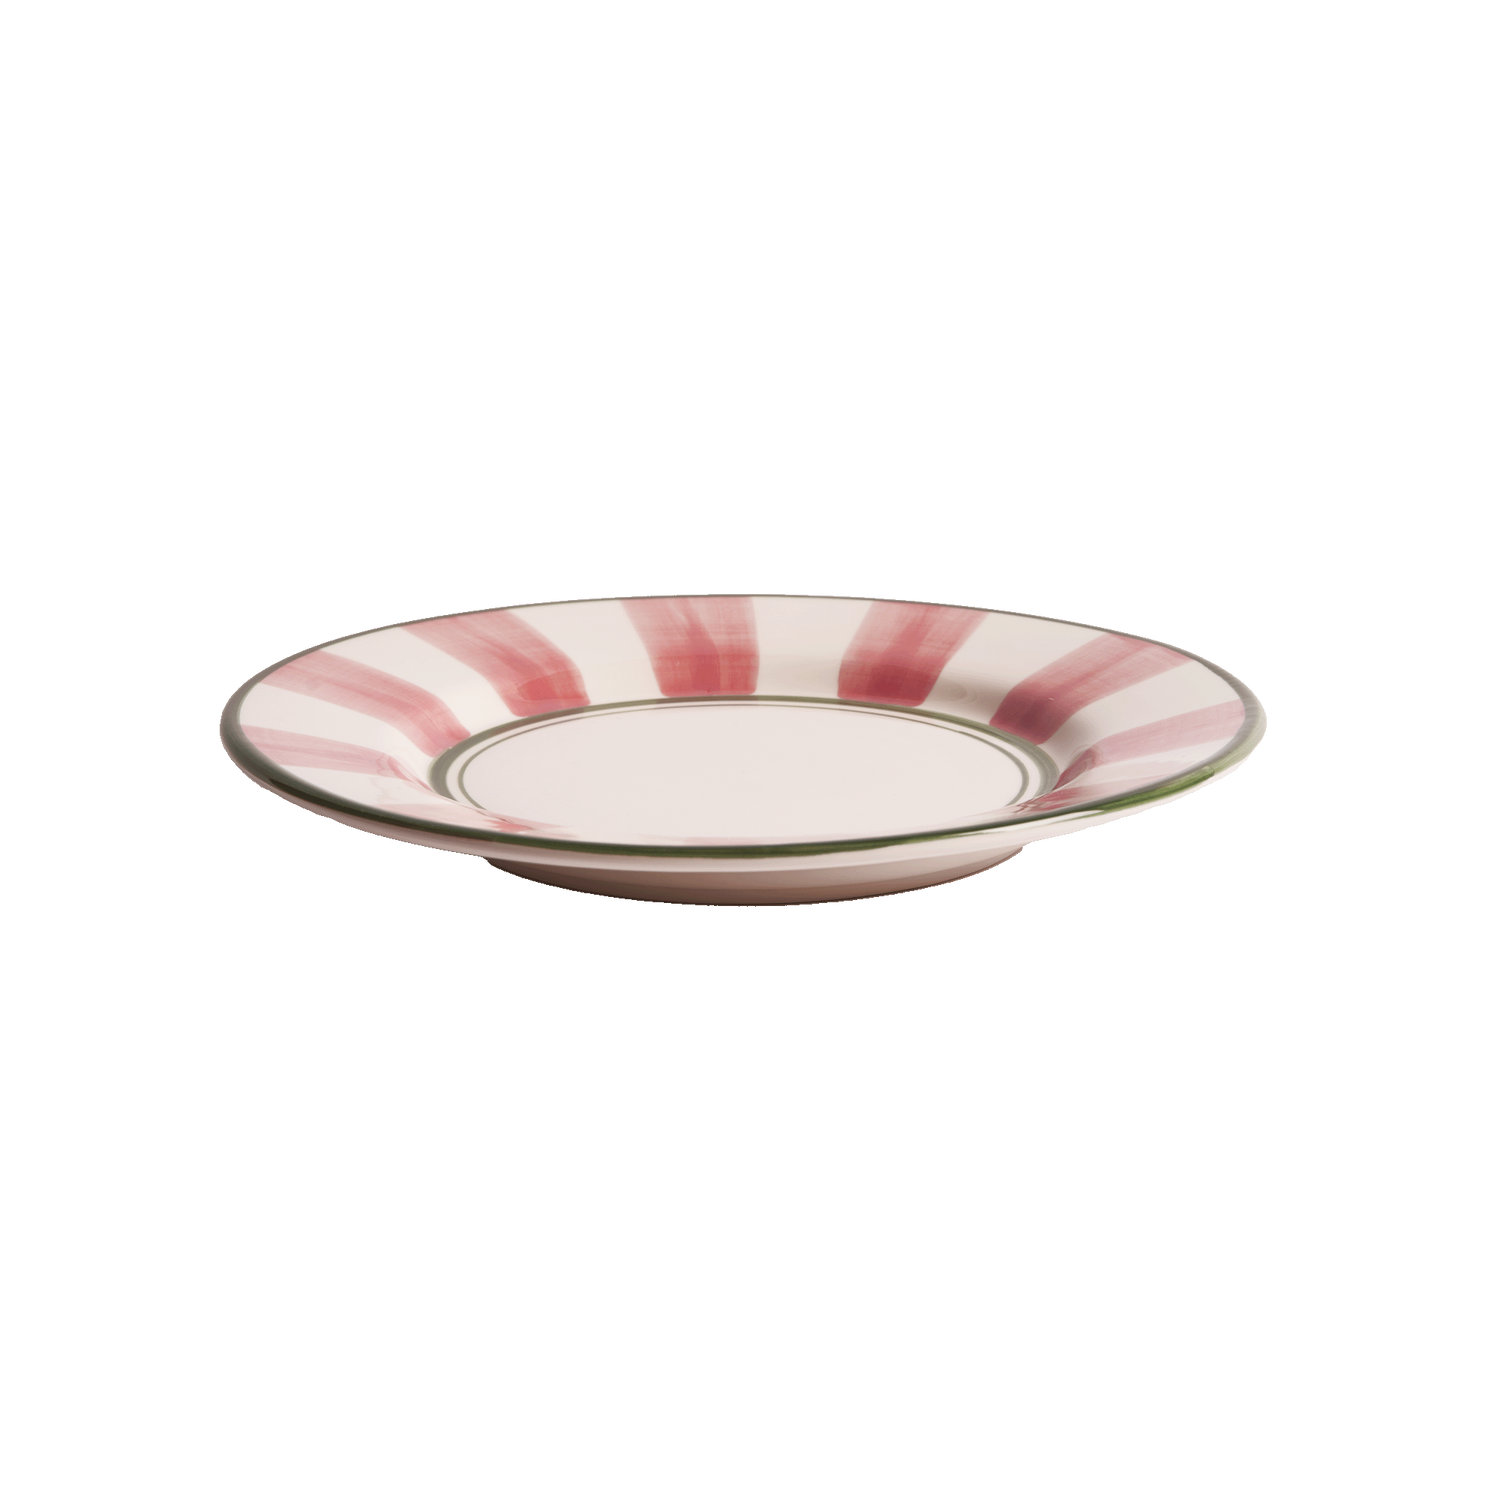 Circus dinner plate - Pink 28 cm